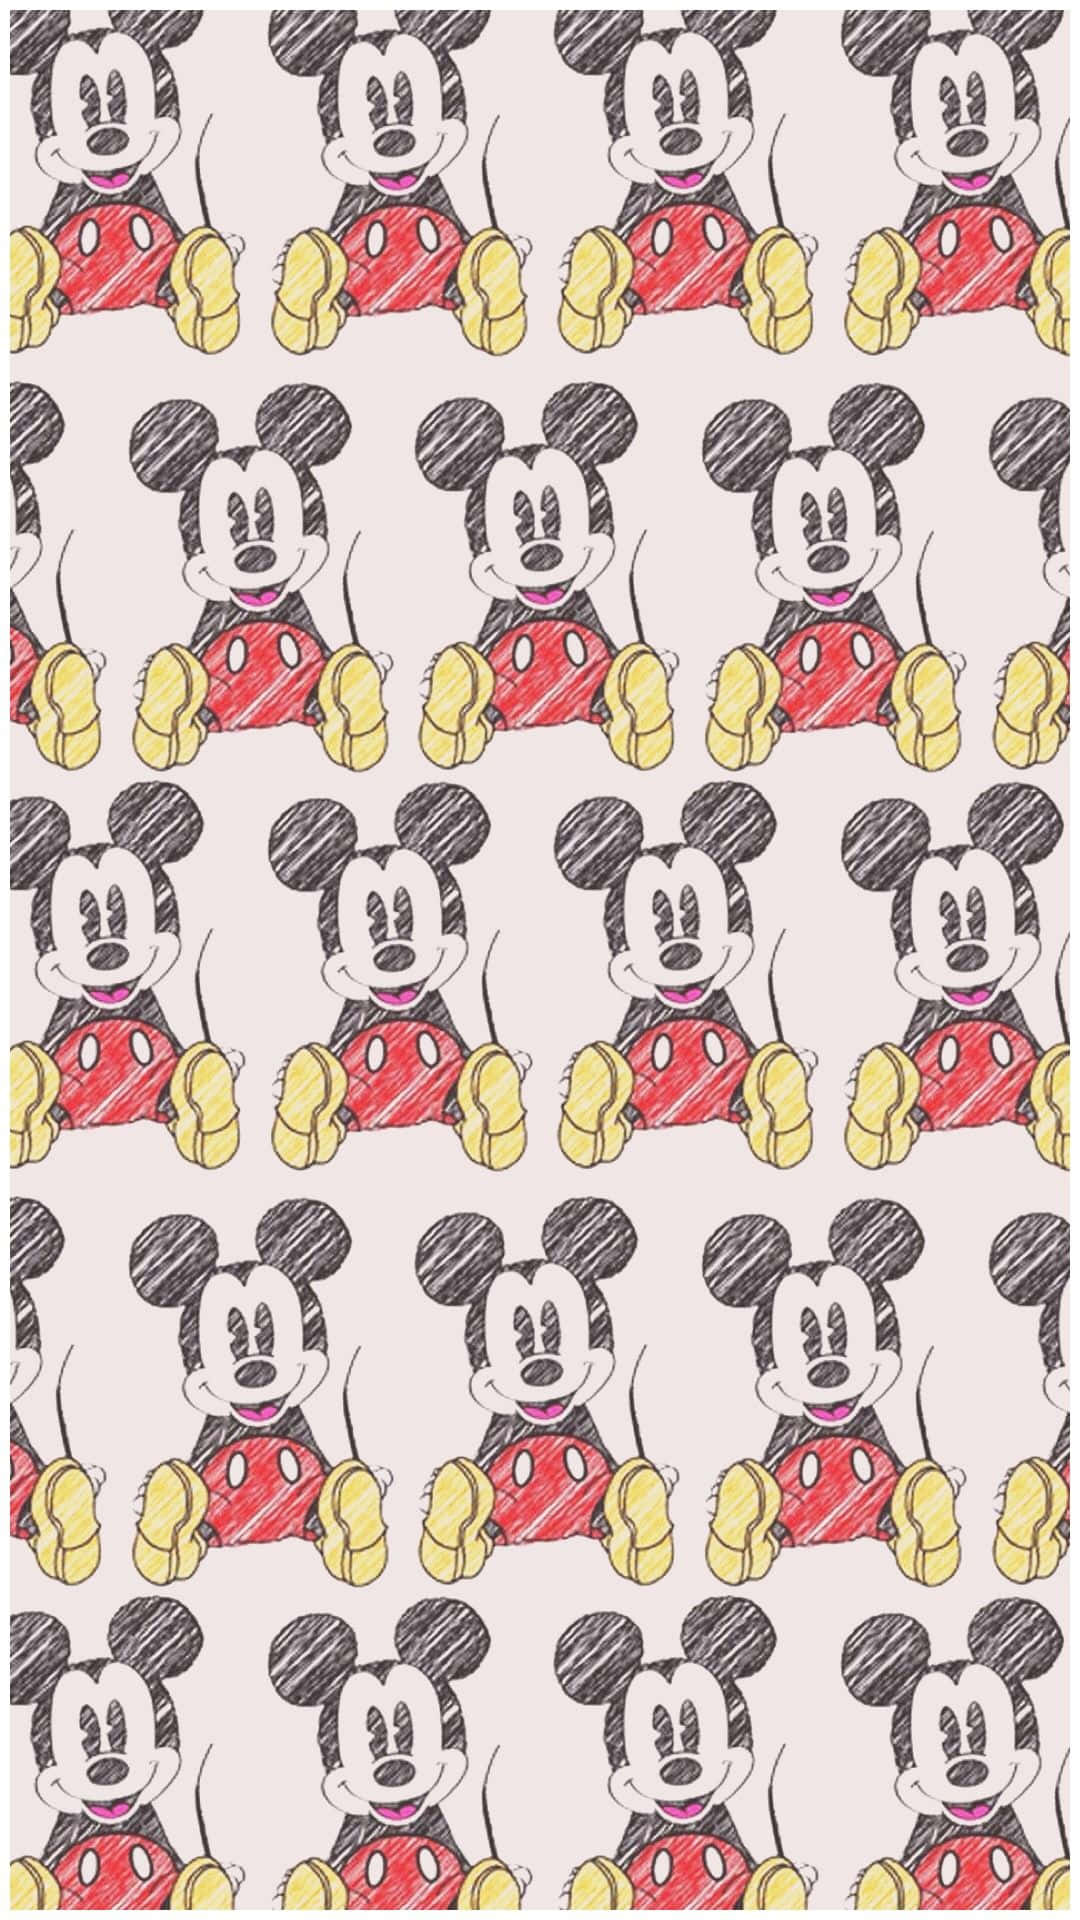 Enjoy The Magical World Of Mickey With This Adorable Wallpaper Of Cute Mickey Mouse!